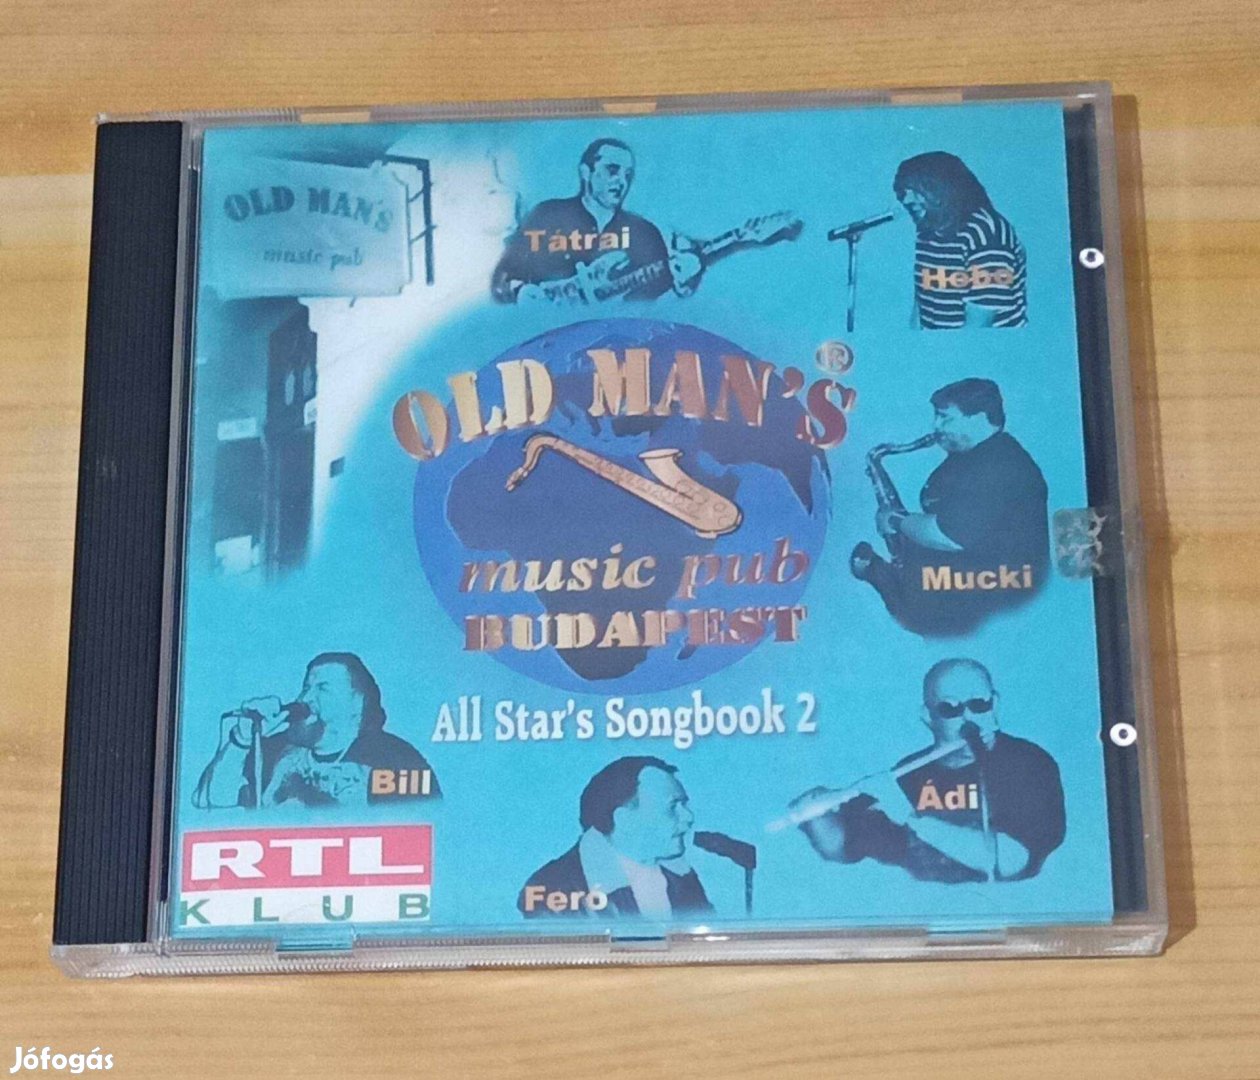 Old Man's All Star's Songbook 2 CD